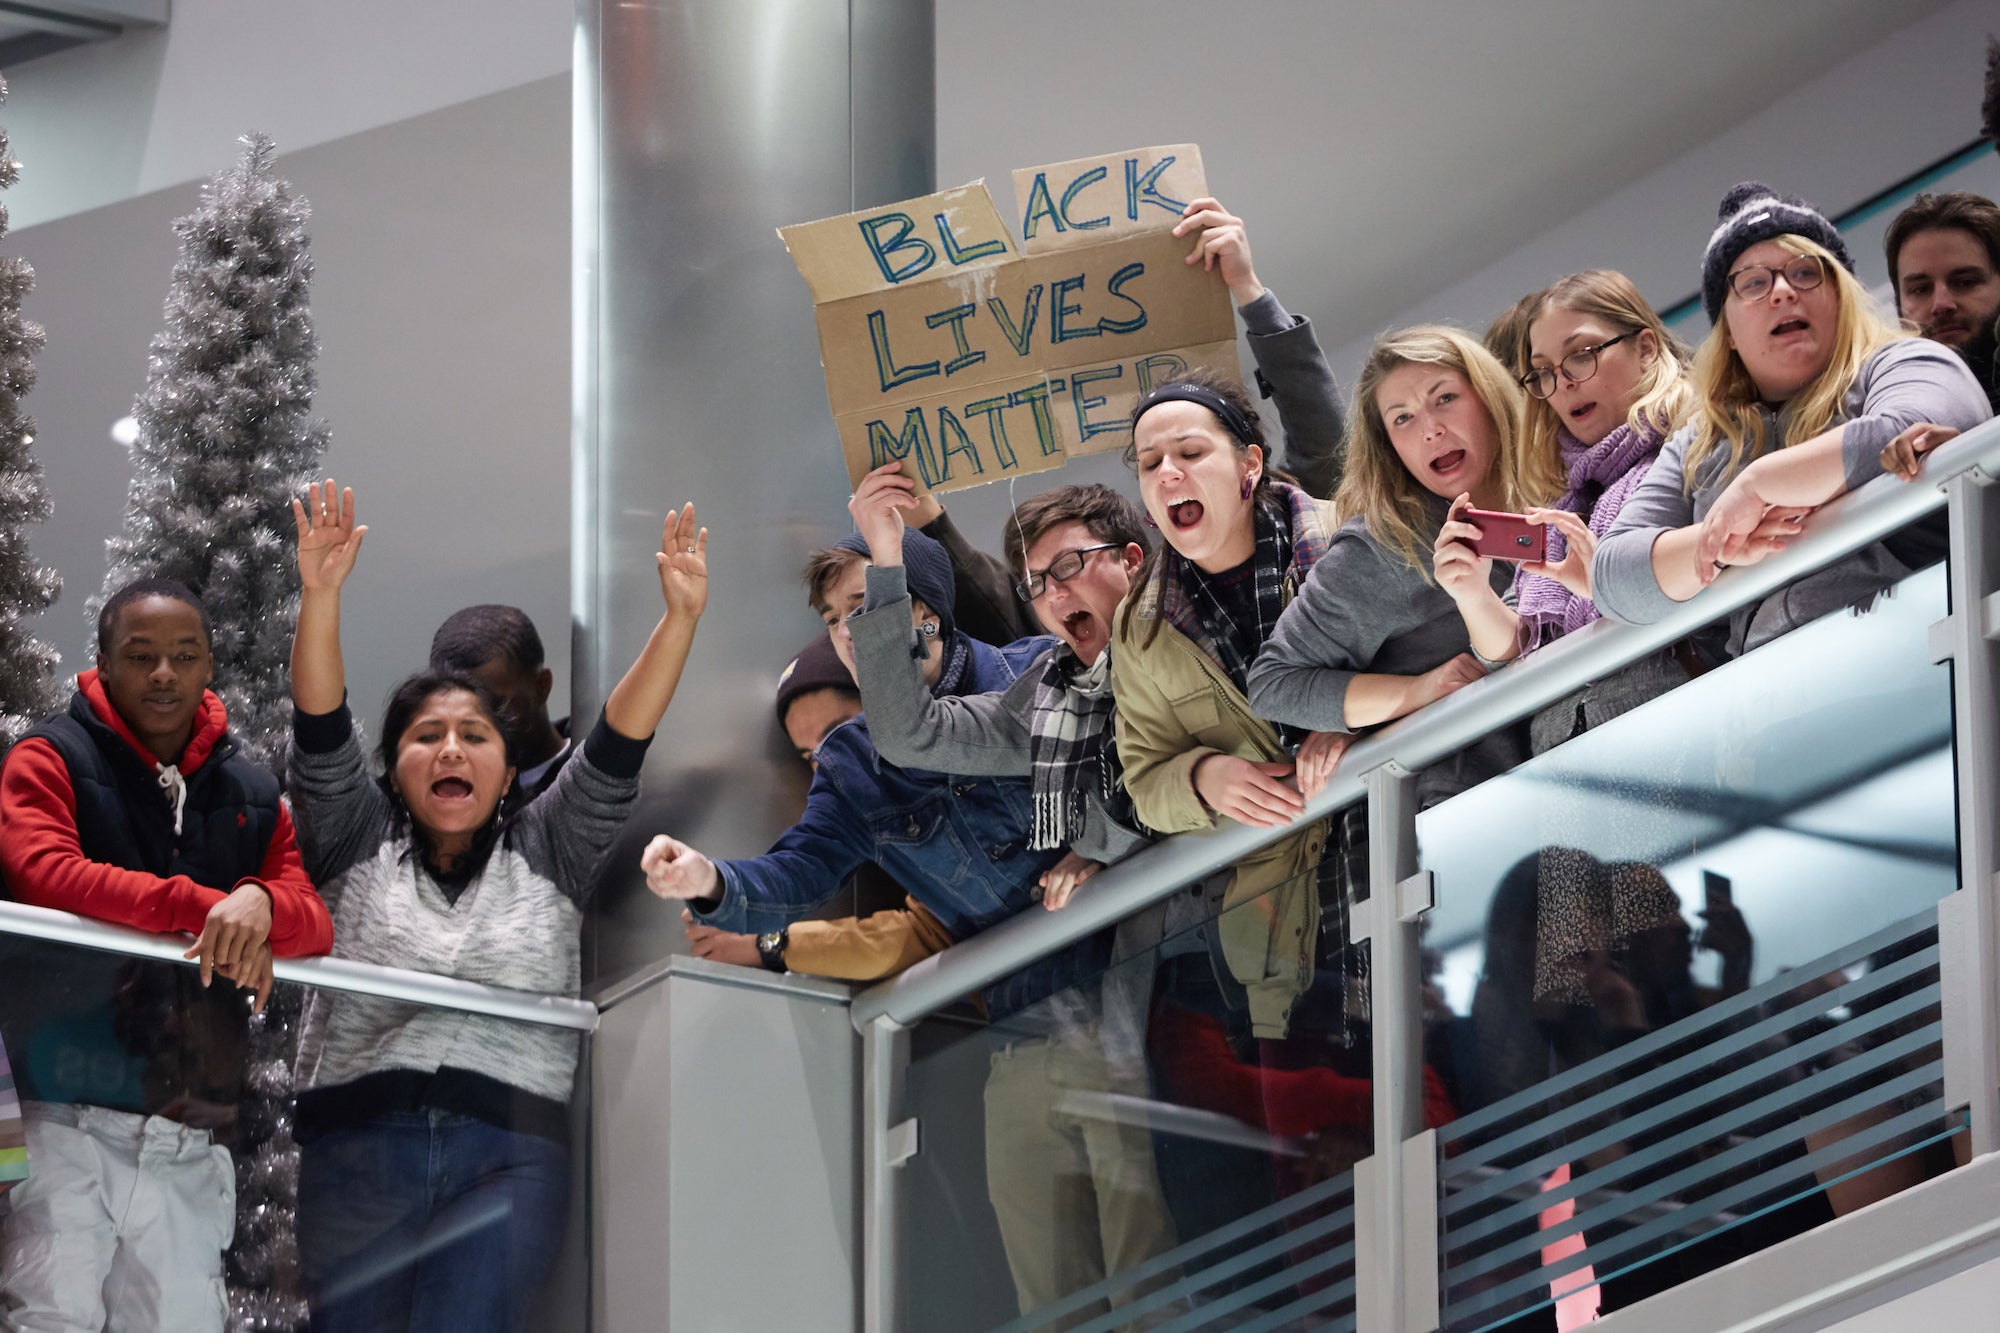 Black Lives Matter activists demonstrate at the Mall of America on December 20, 2014.